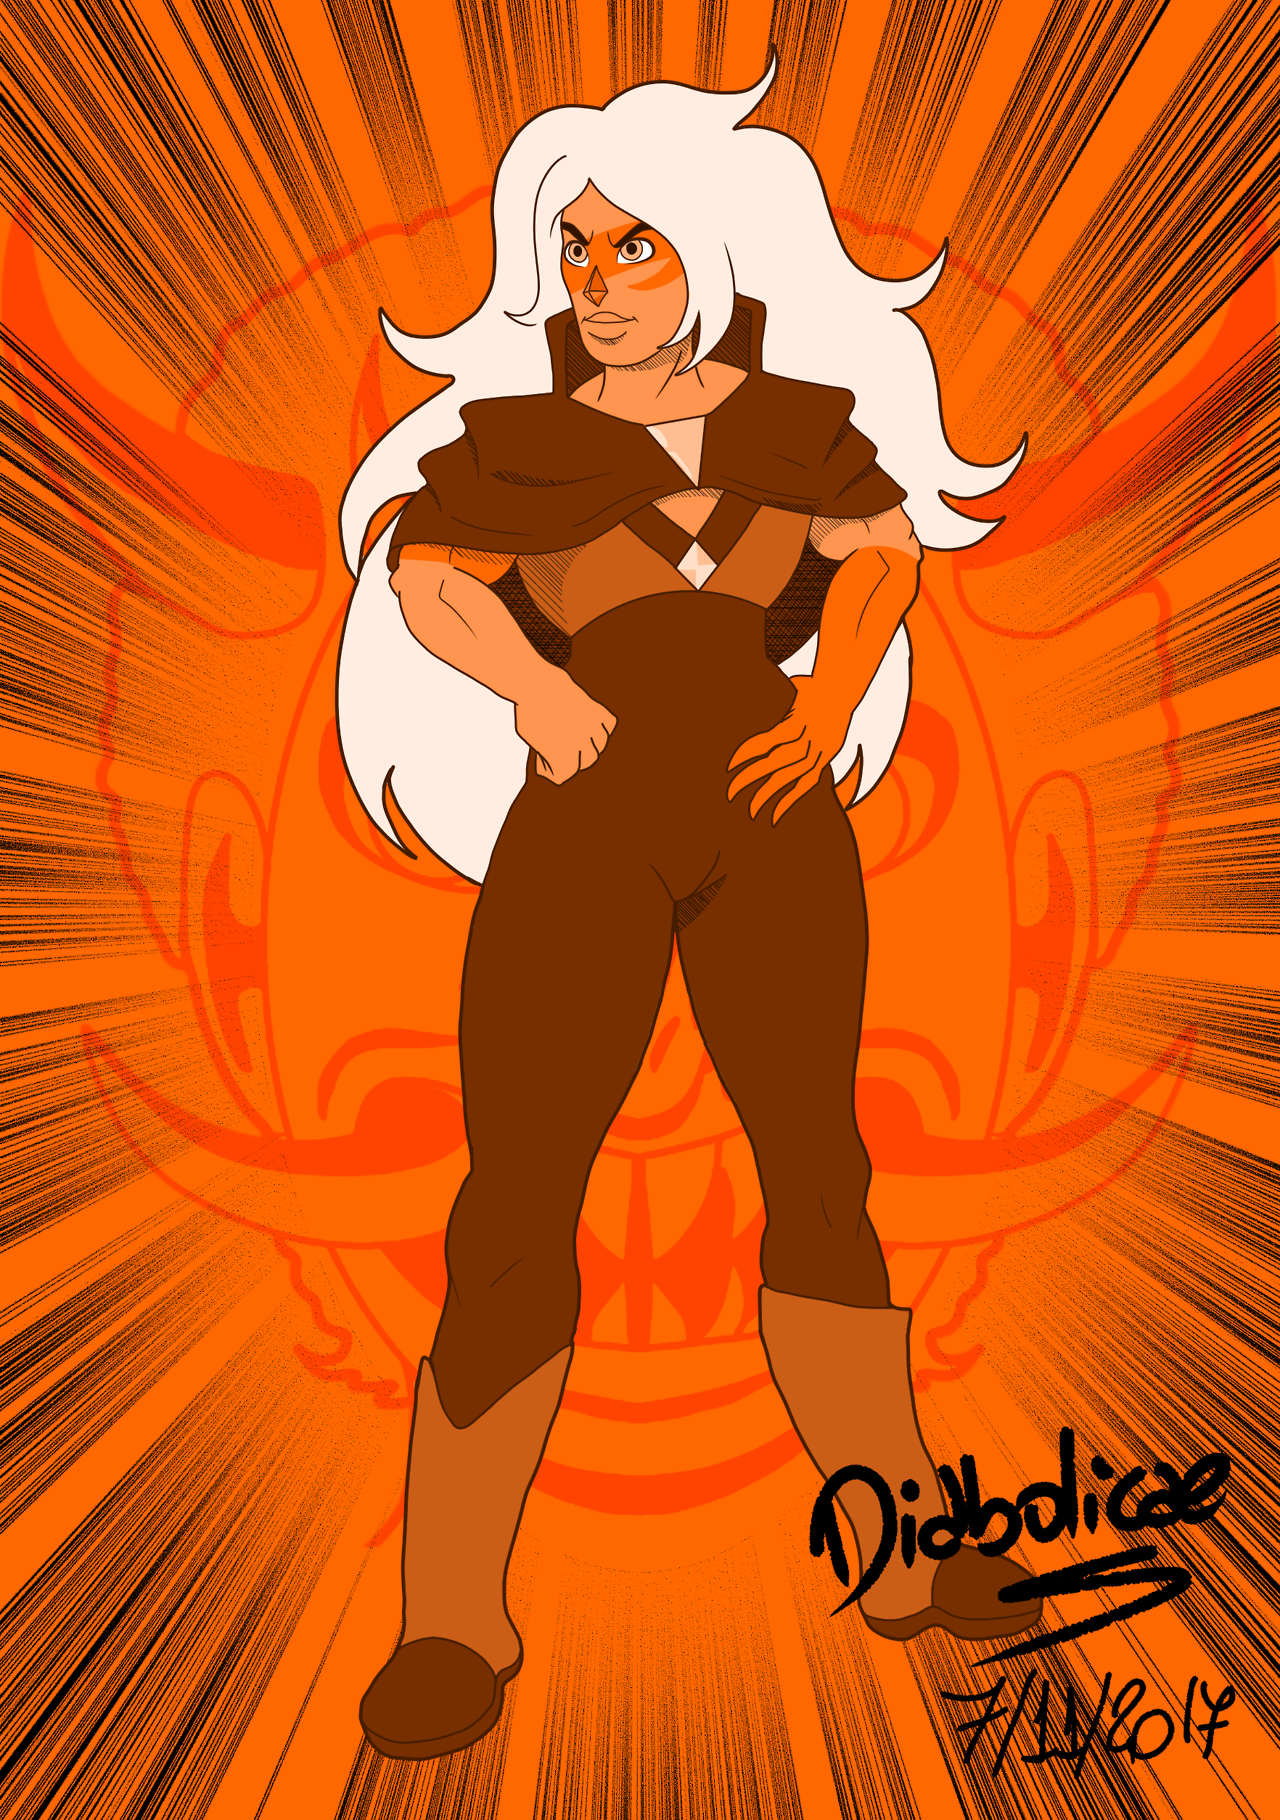 Huevember #2 - Jasper Here’s my second entry for the Huevember series, following the orange hue, I decided to draw everyone’s most loved space Cheeto Buff Gem, Jasper!